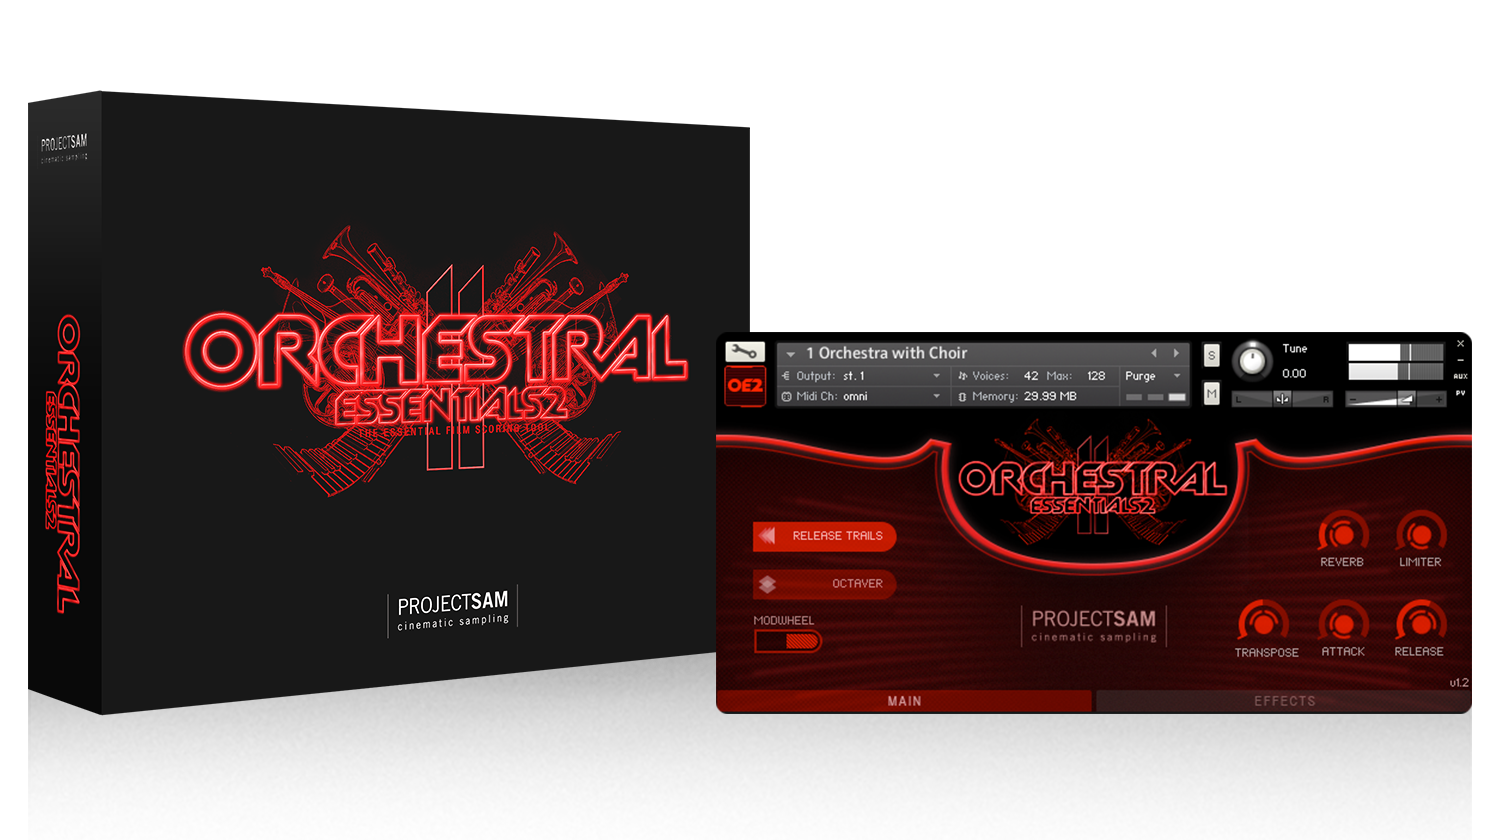 Orchestral Essentials 1 v1.2. PROJECTSAM Orchestral Essentials 2. PROJECTSAM Orchestral Essentials. Сэмплы.